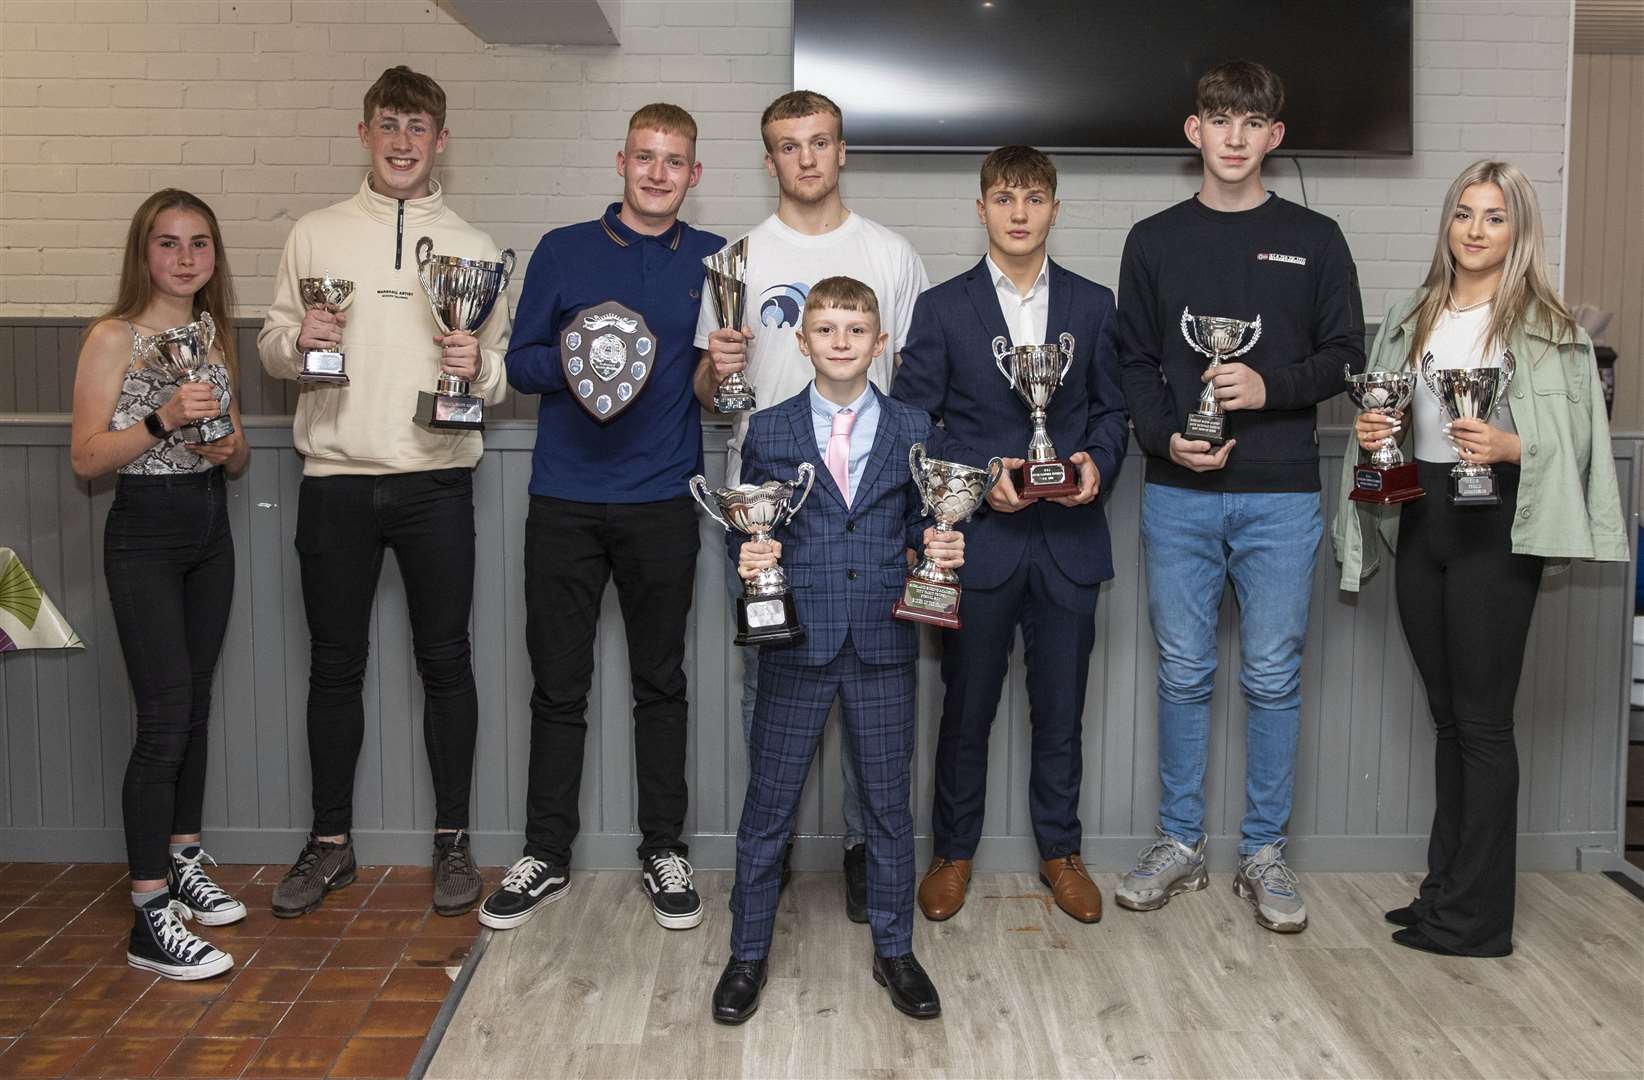 Highland Boxing Academy's award winners from the 2021/22 season.